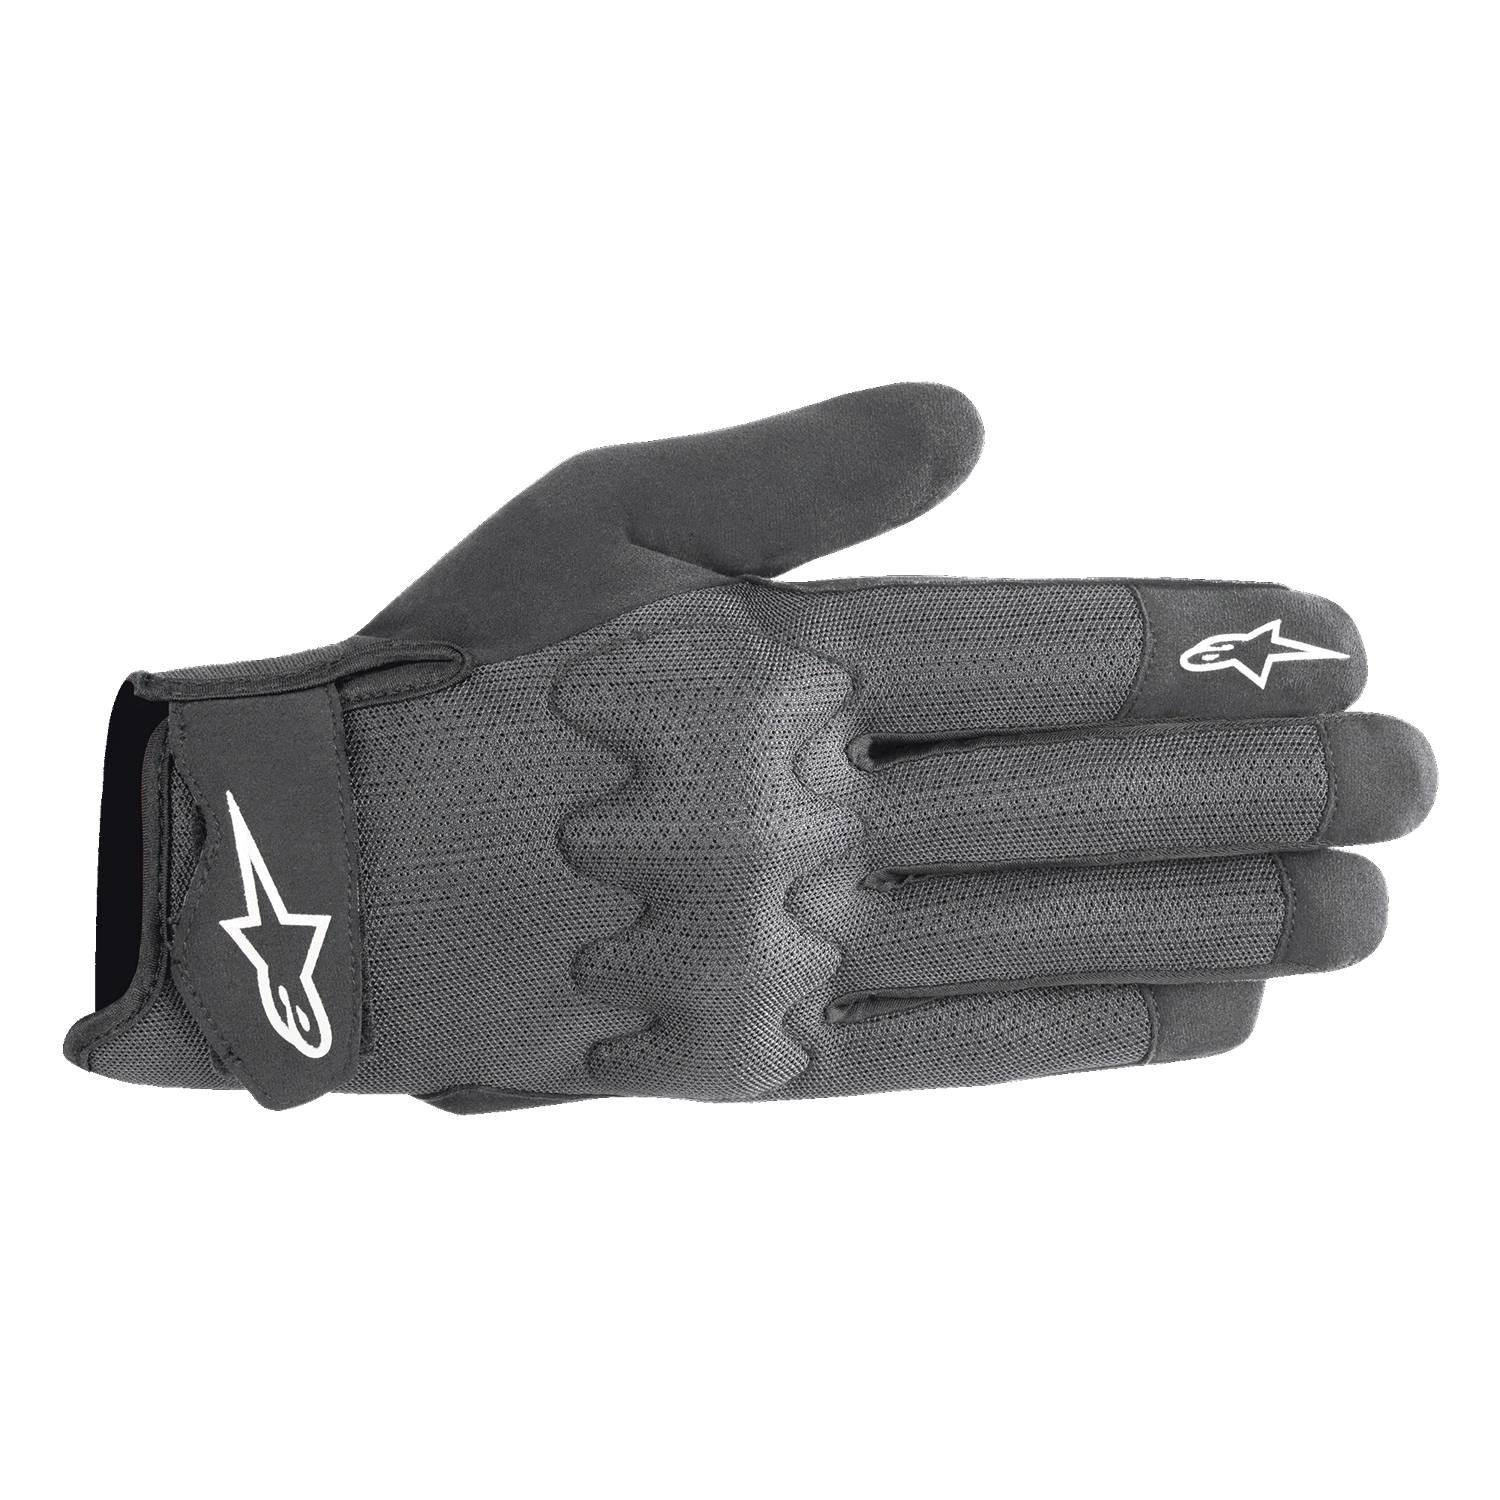 Image of EU Alpinestars Stated Air Gloves Black Silver Taille XL